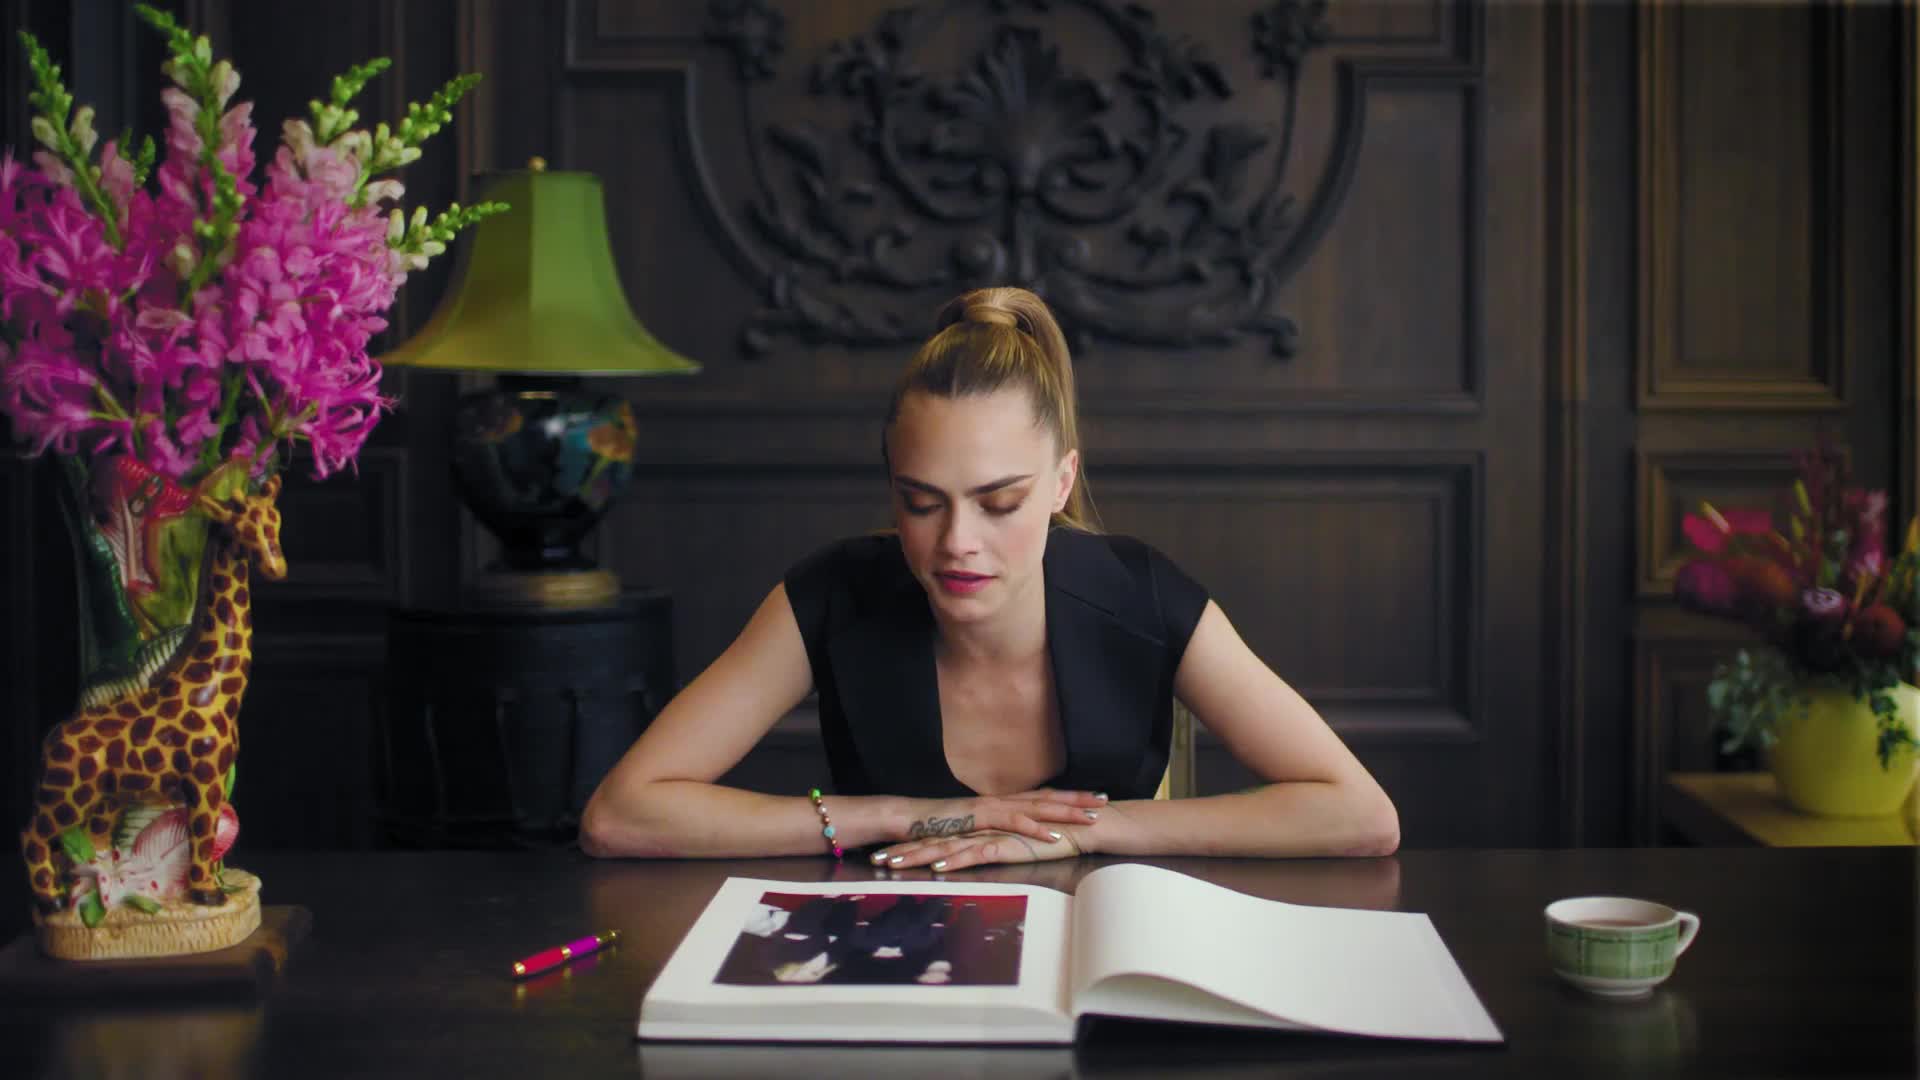 Watch Cara Delevingne Revisits Her Life in Looks, From 2002 to Now